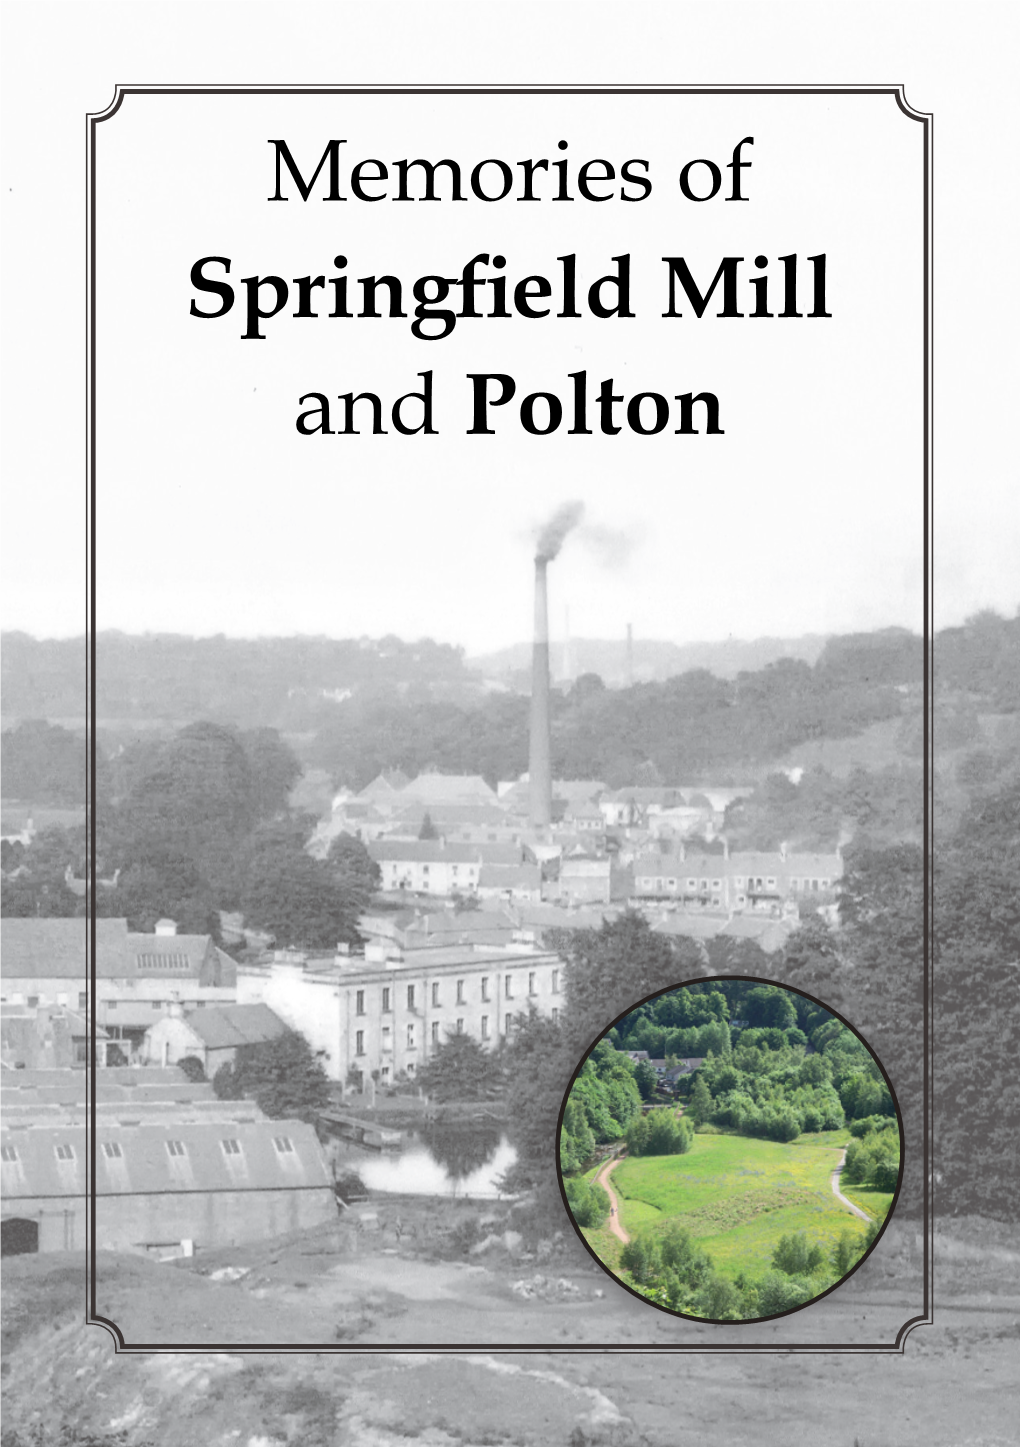 Memories of Springfield Mill and Polton Contents